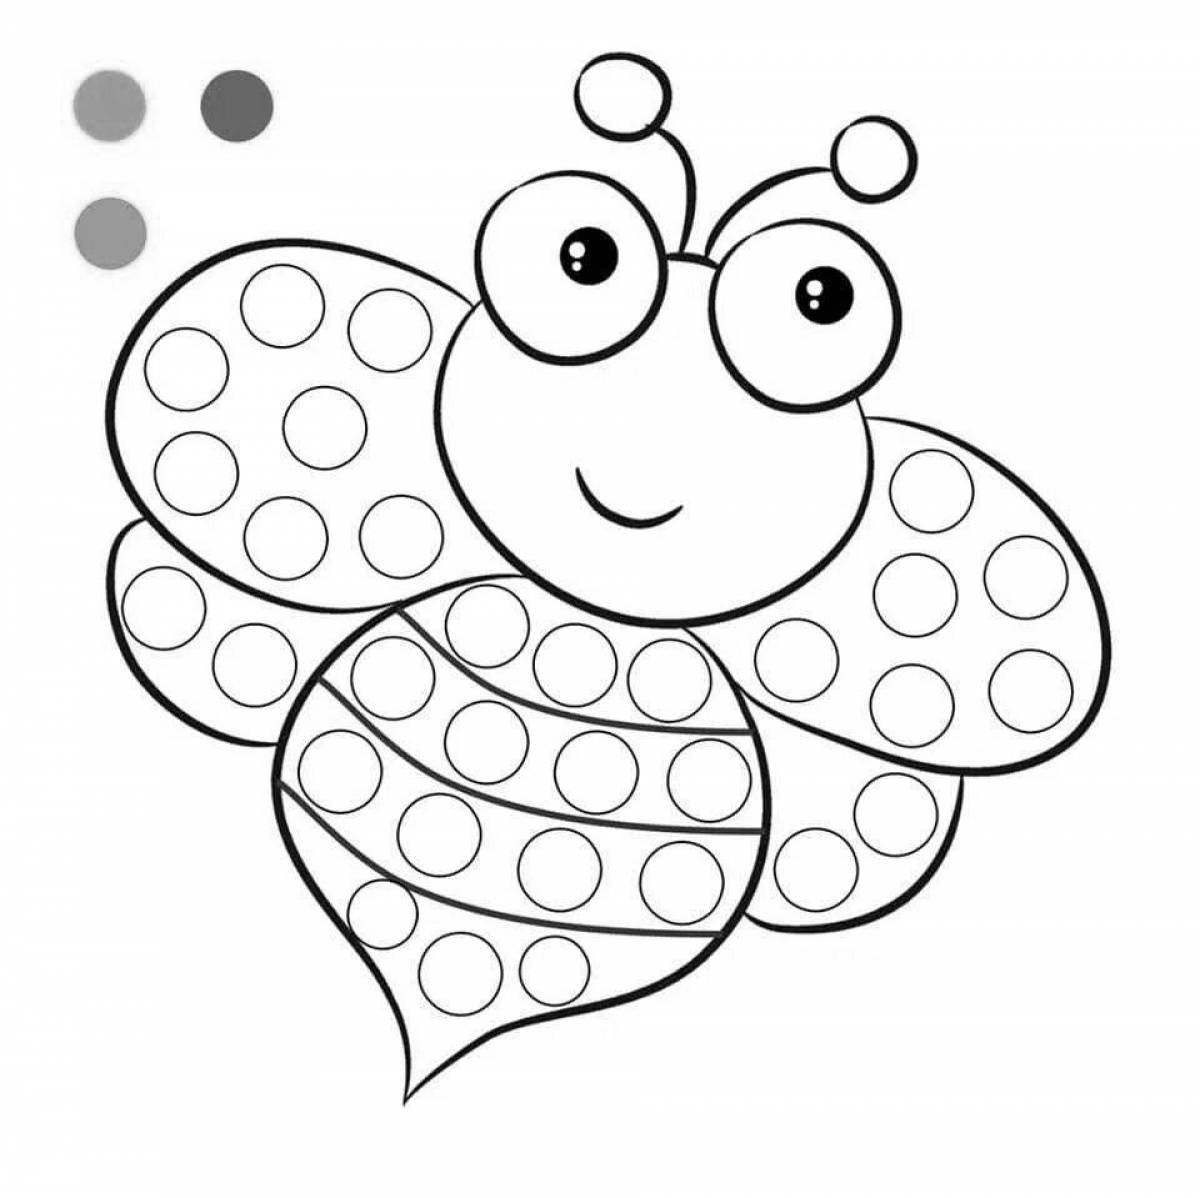 Playful cotton swab coloring page for kids